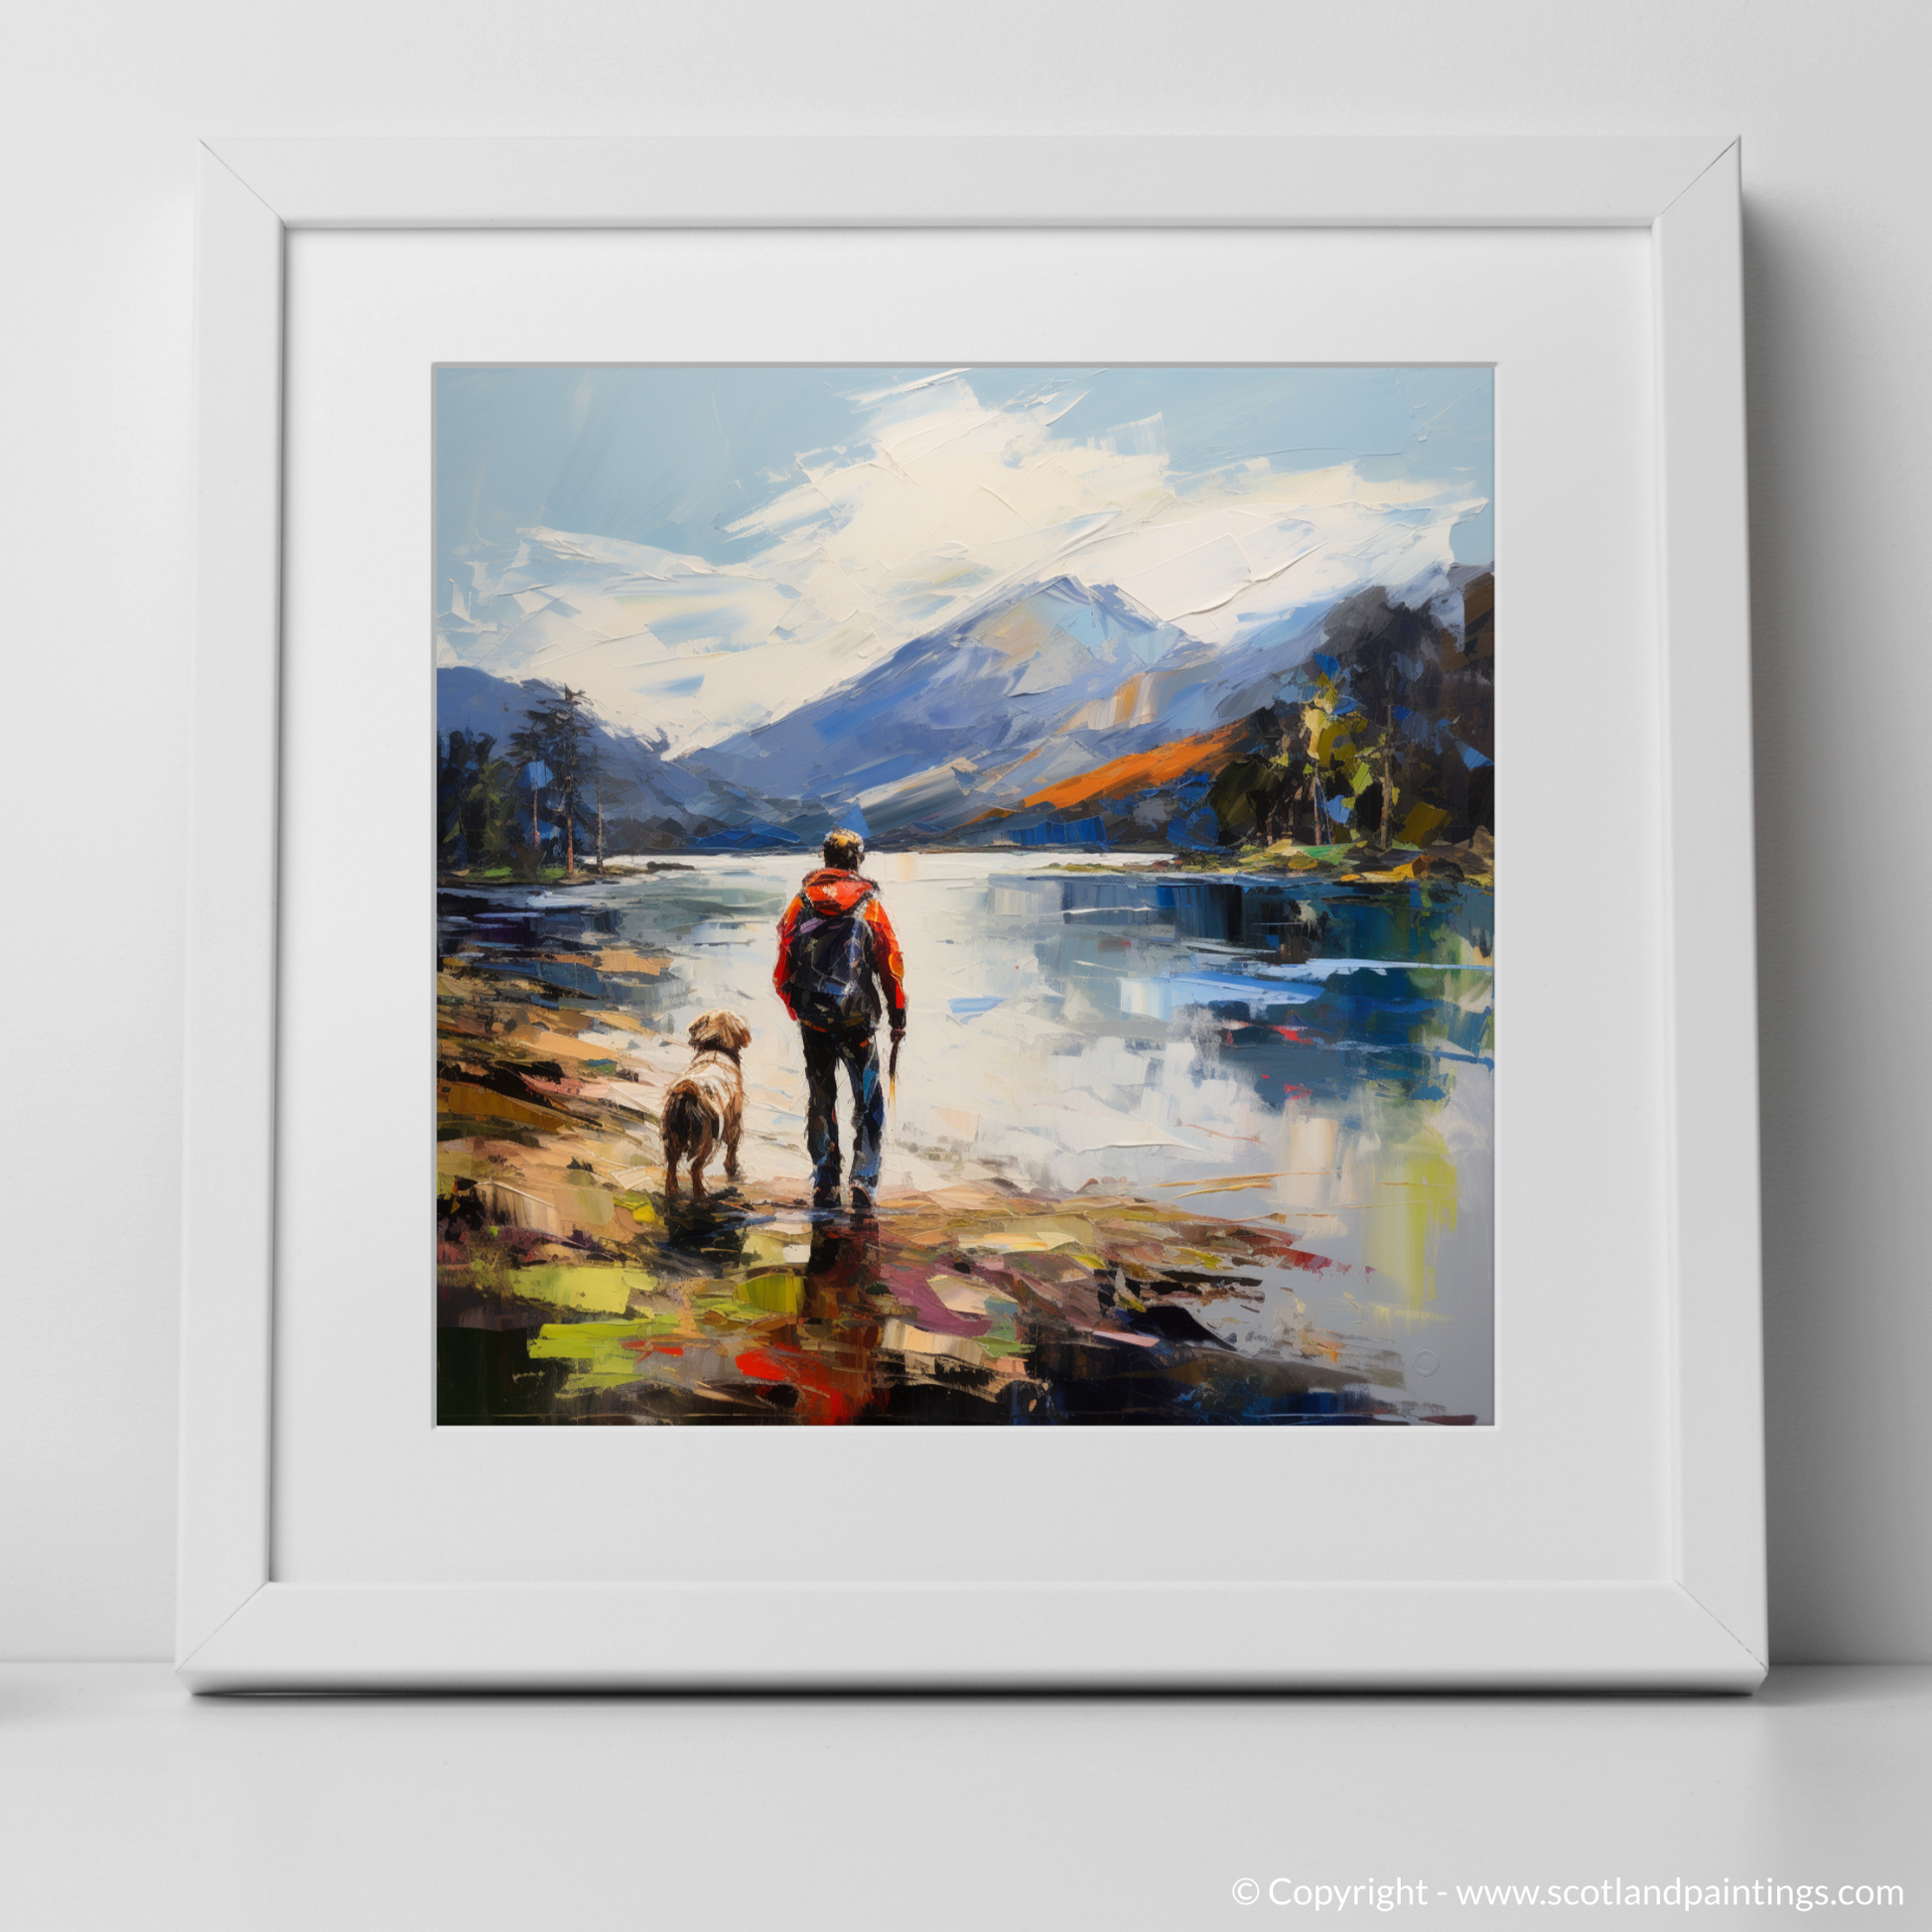 Art Print of A man walking dog at the side of Loch Lomond with a white frame